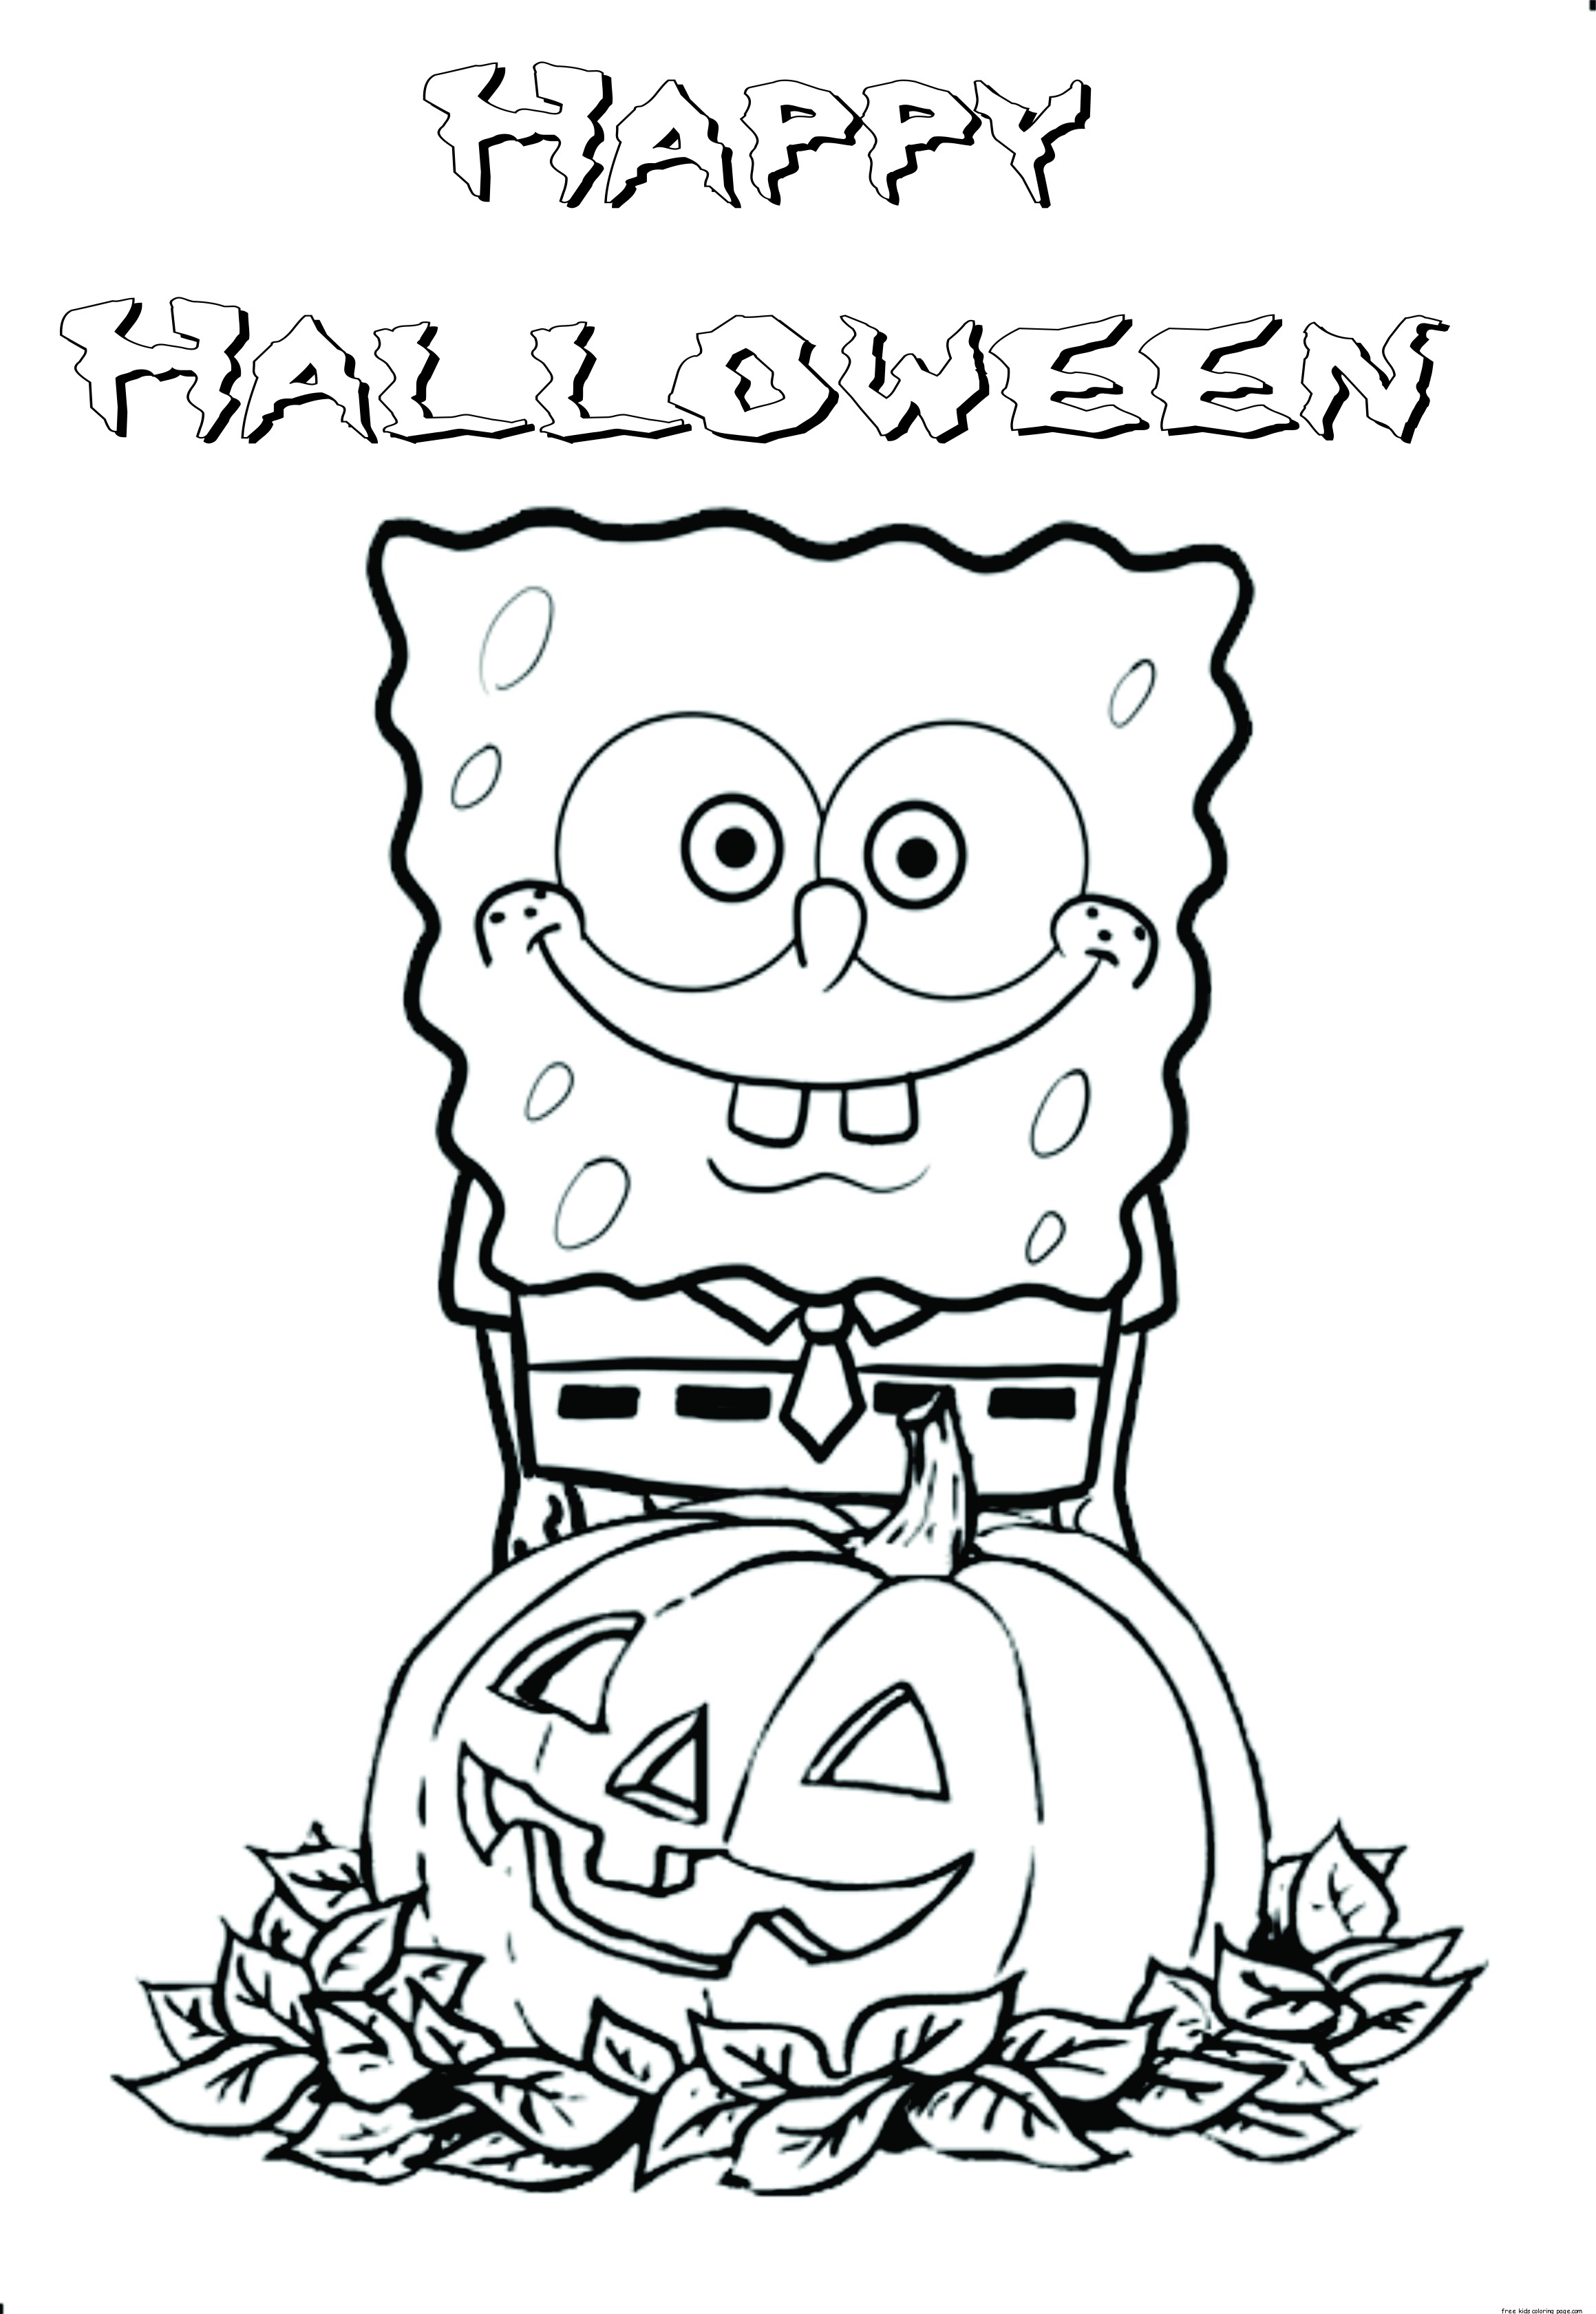 Download Coloring Pages For Kids To Print Out Pics COLORIST